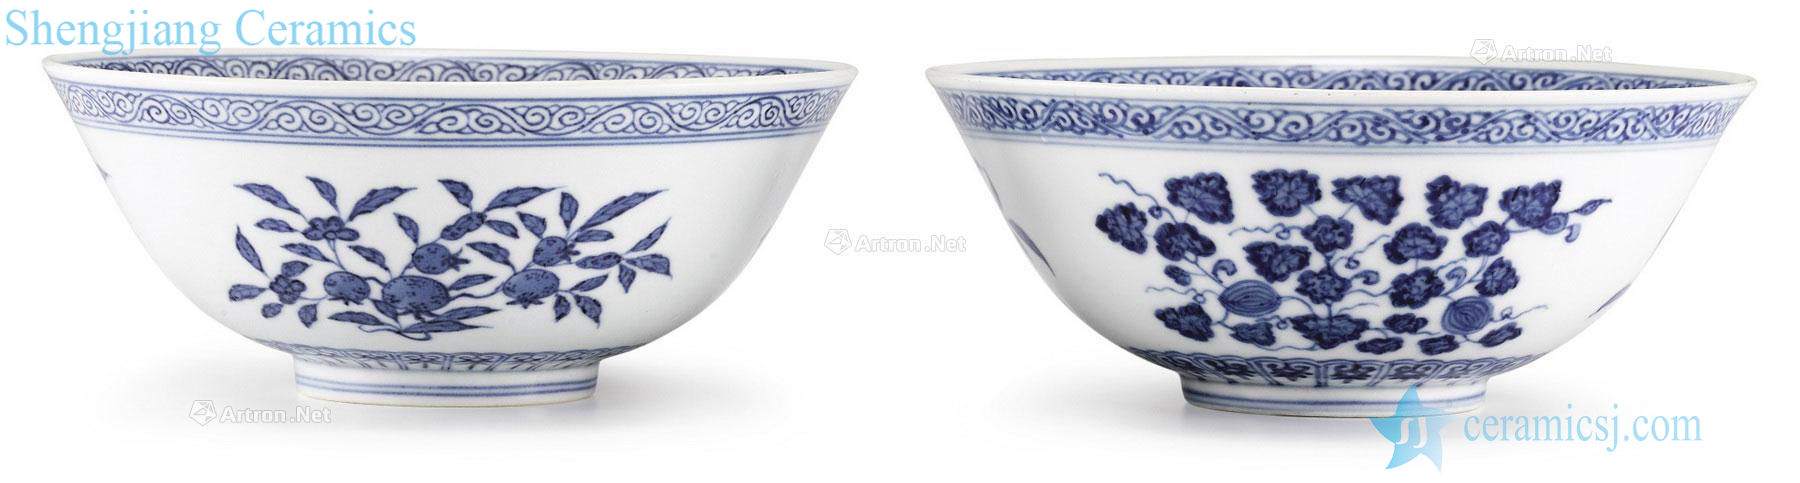 Qing daoguang Blue and white sanduo grain 盌 (a)